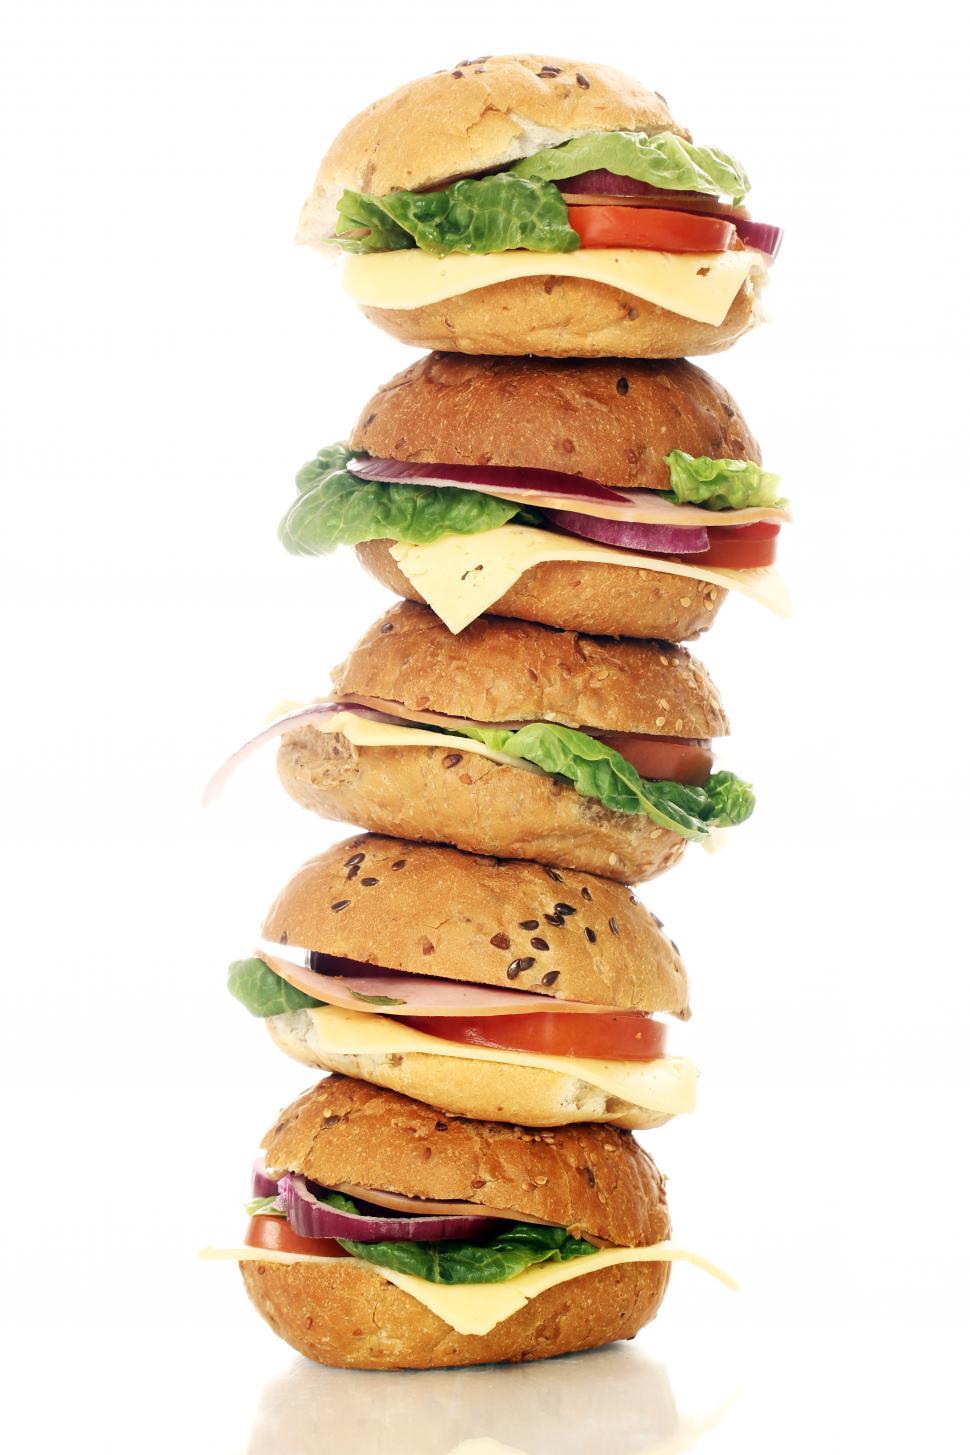 Free Image of Tower of homemade sandwiches 